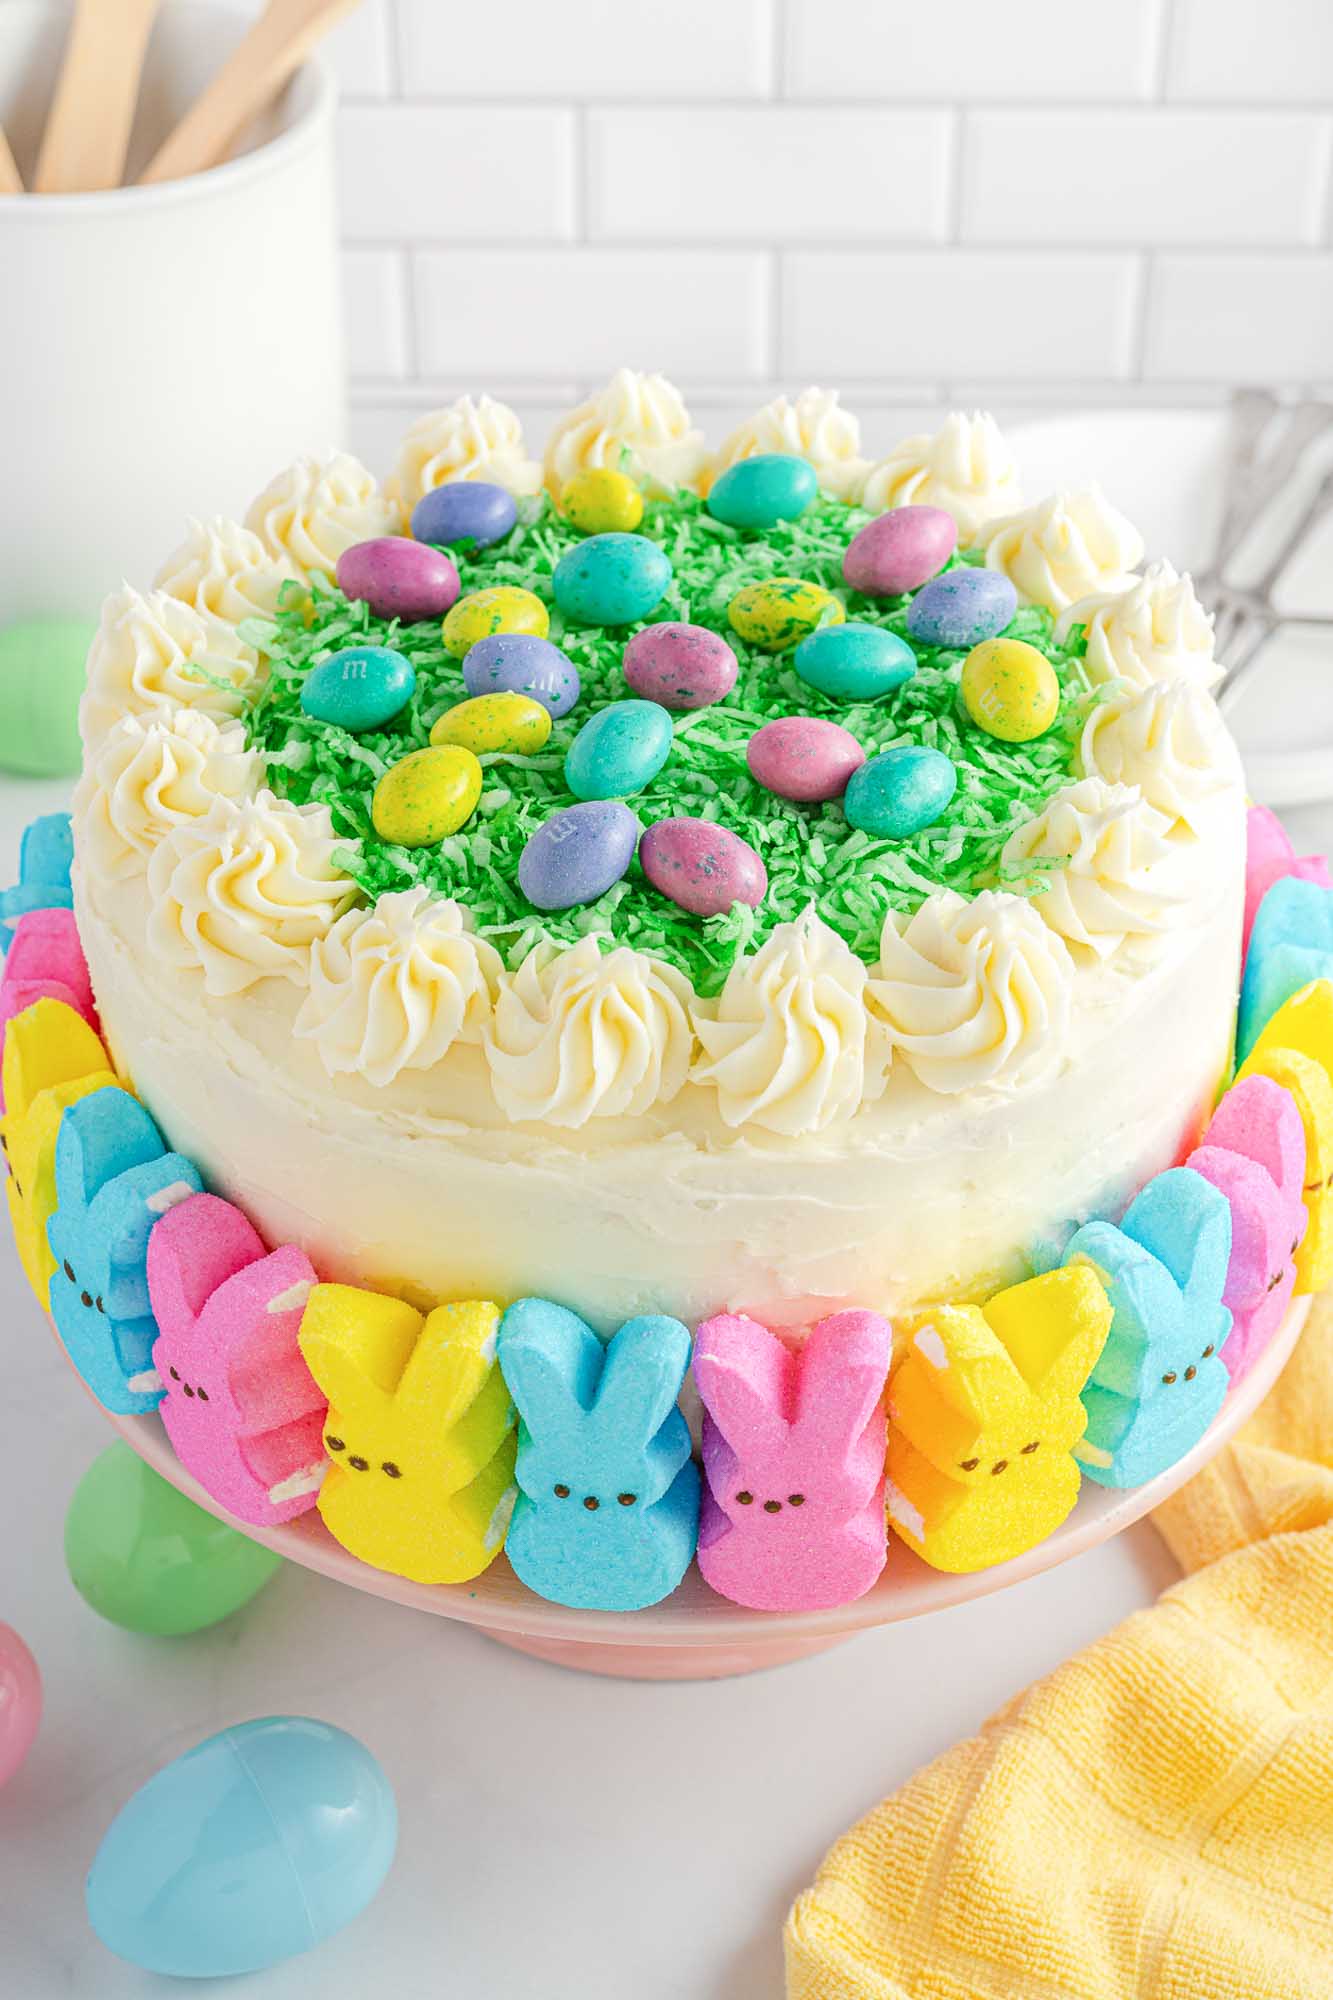 Easter Peep cake decorated with peeps, green coconut grass and buttercream.